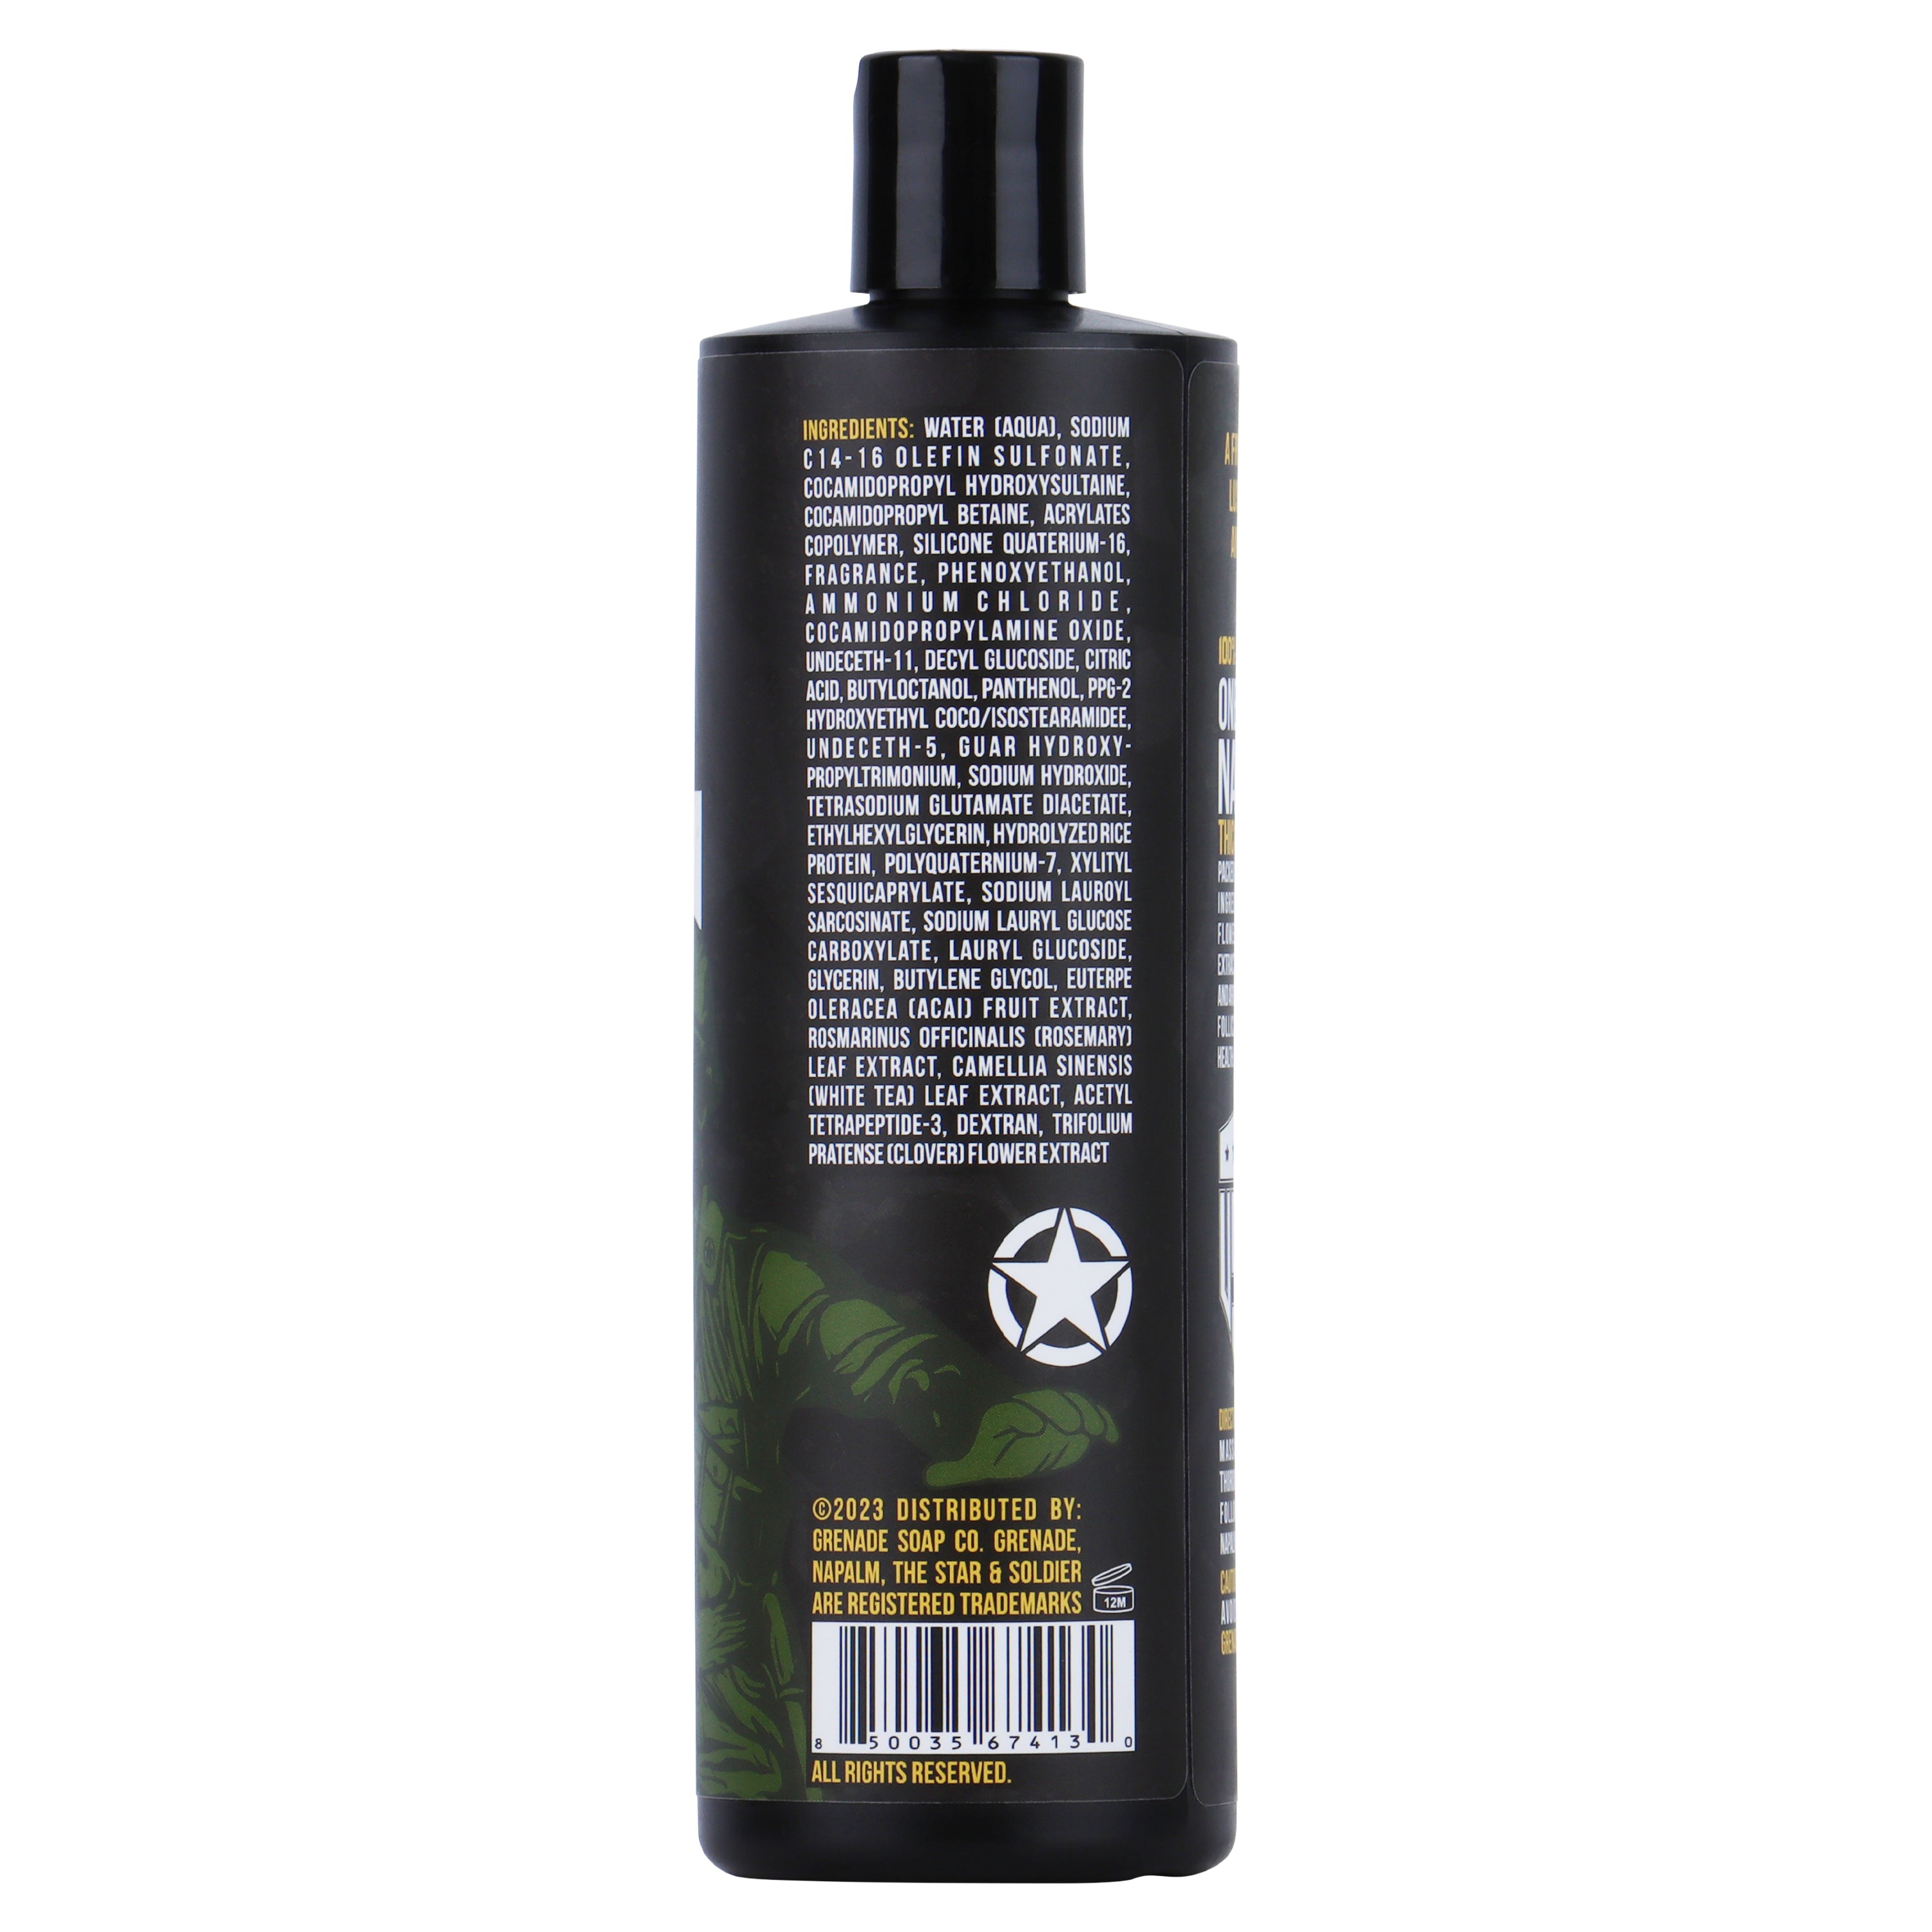 ONE MAN ARMY NAPALM® HAIR THICKENING DUO